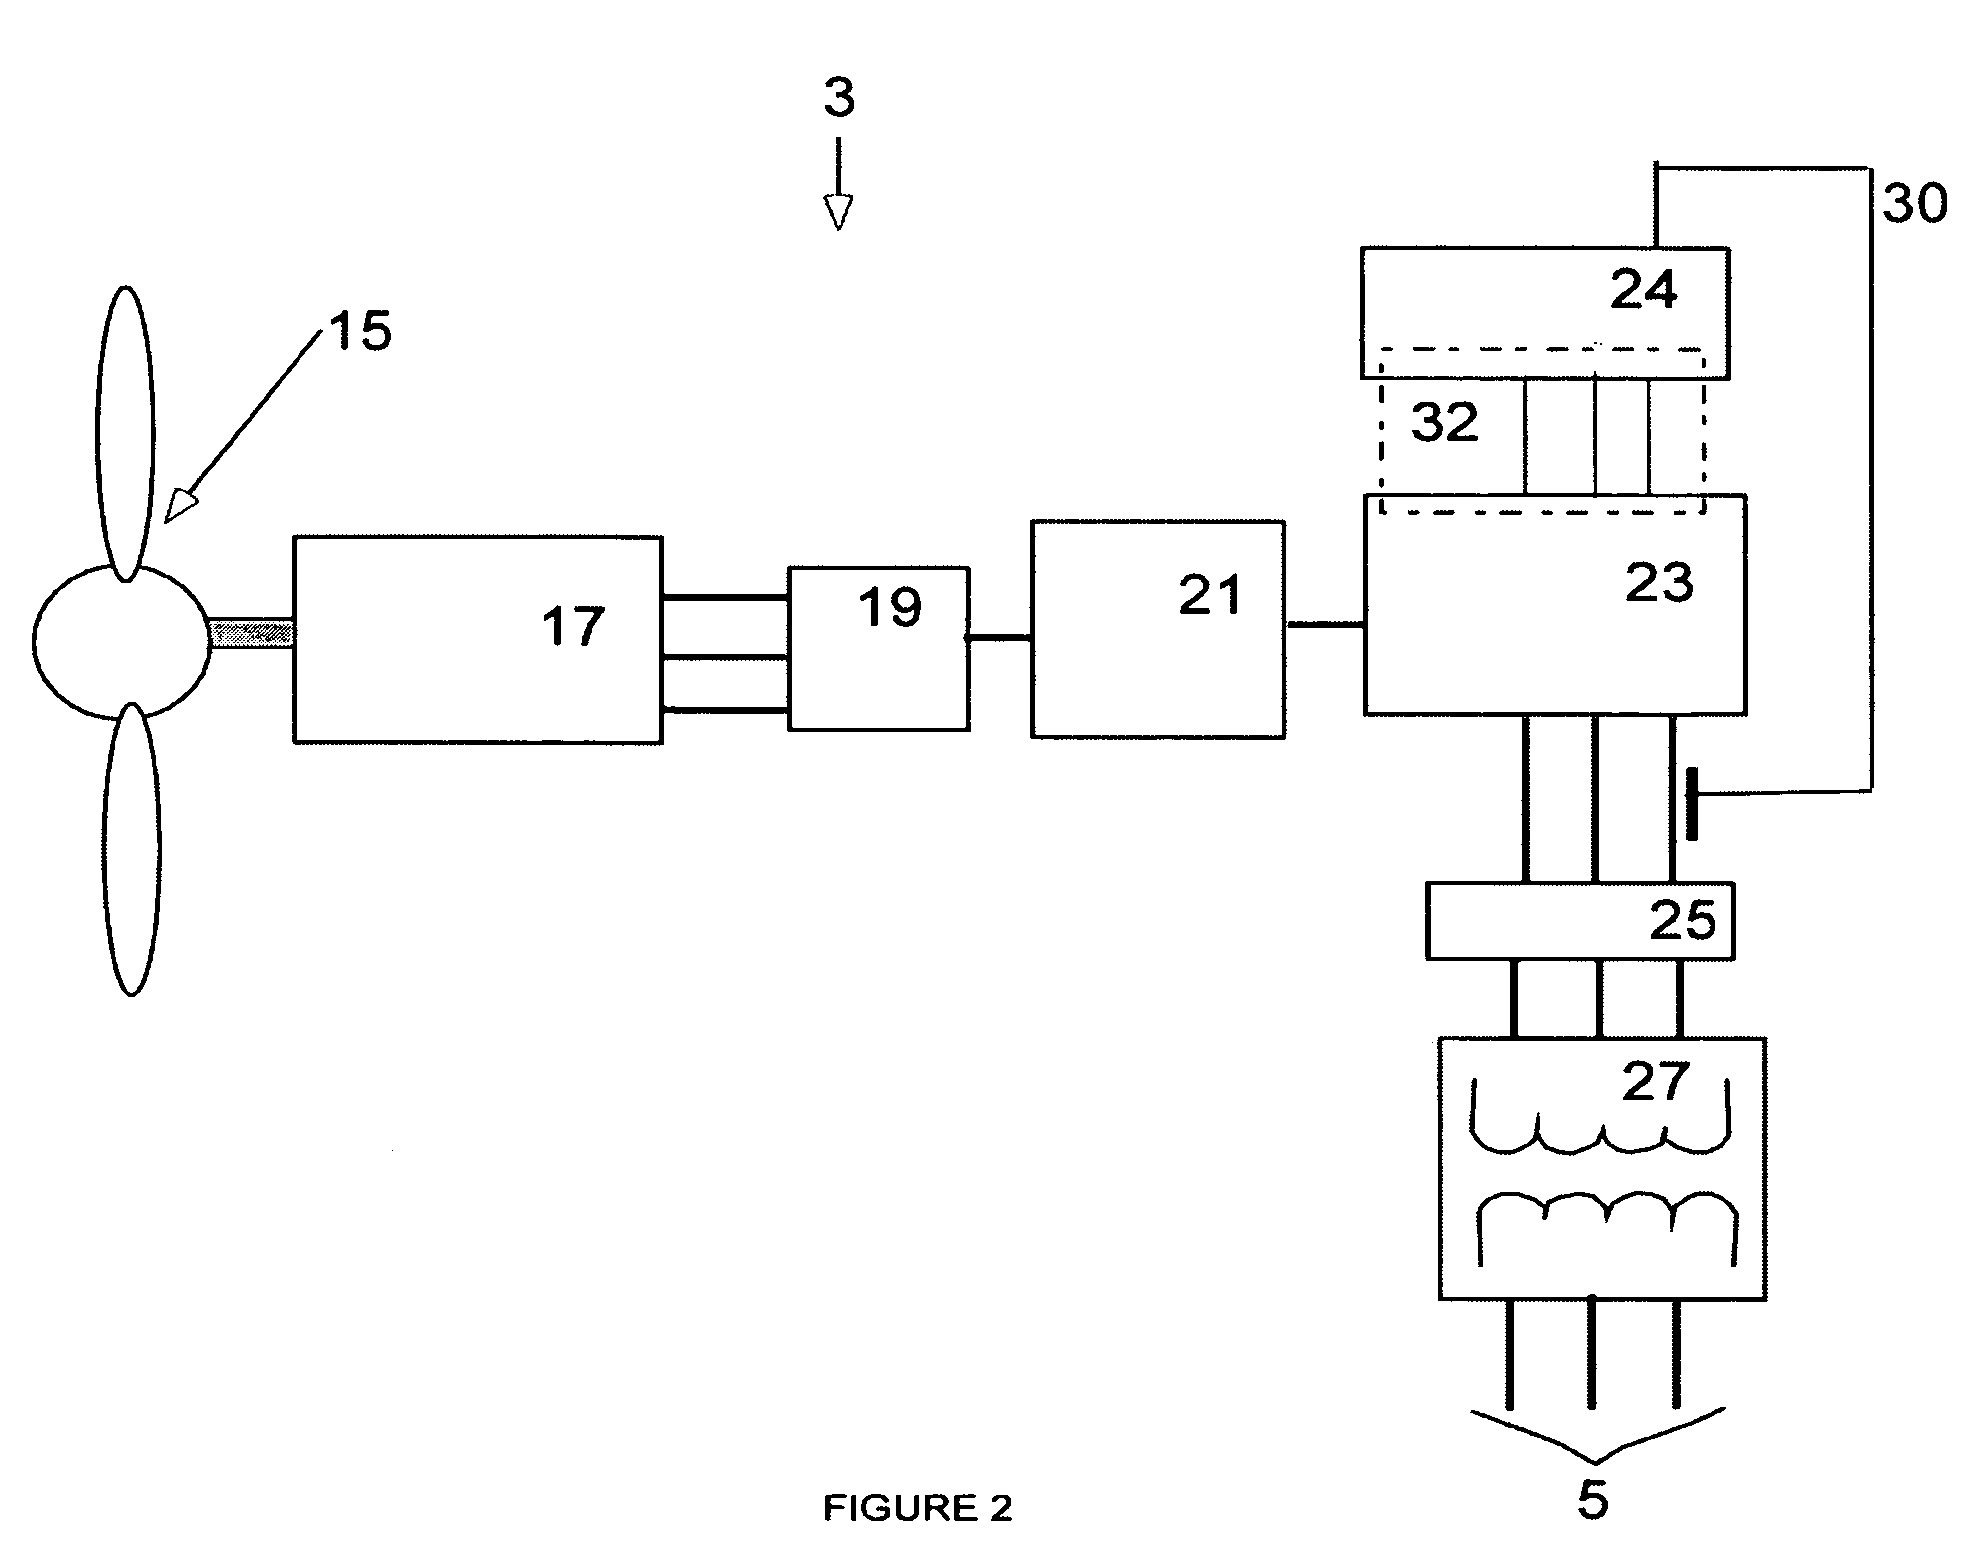 Generator with utility fault ride-through capability